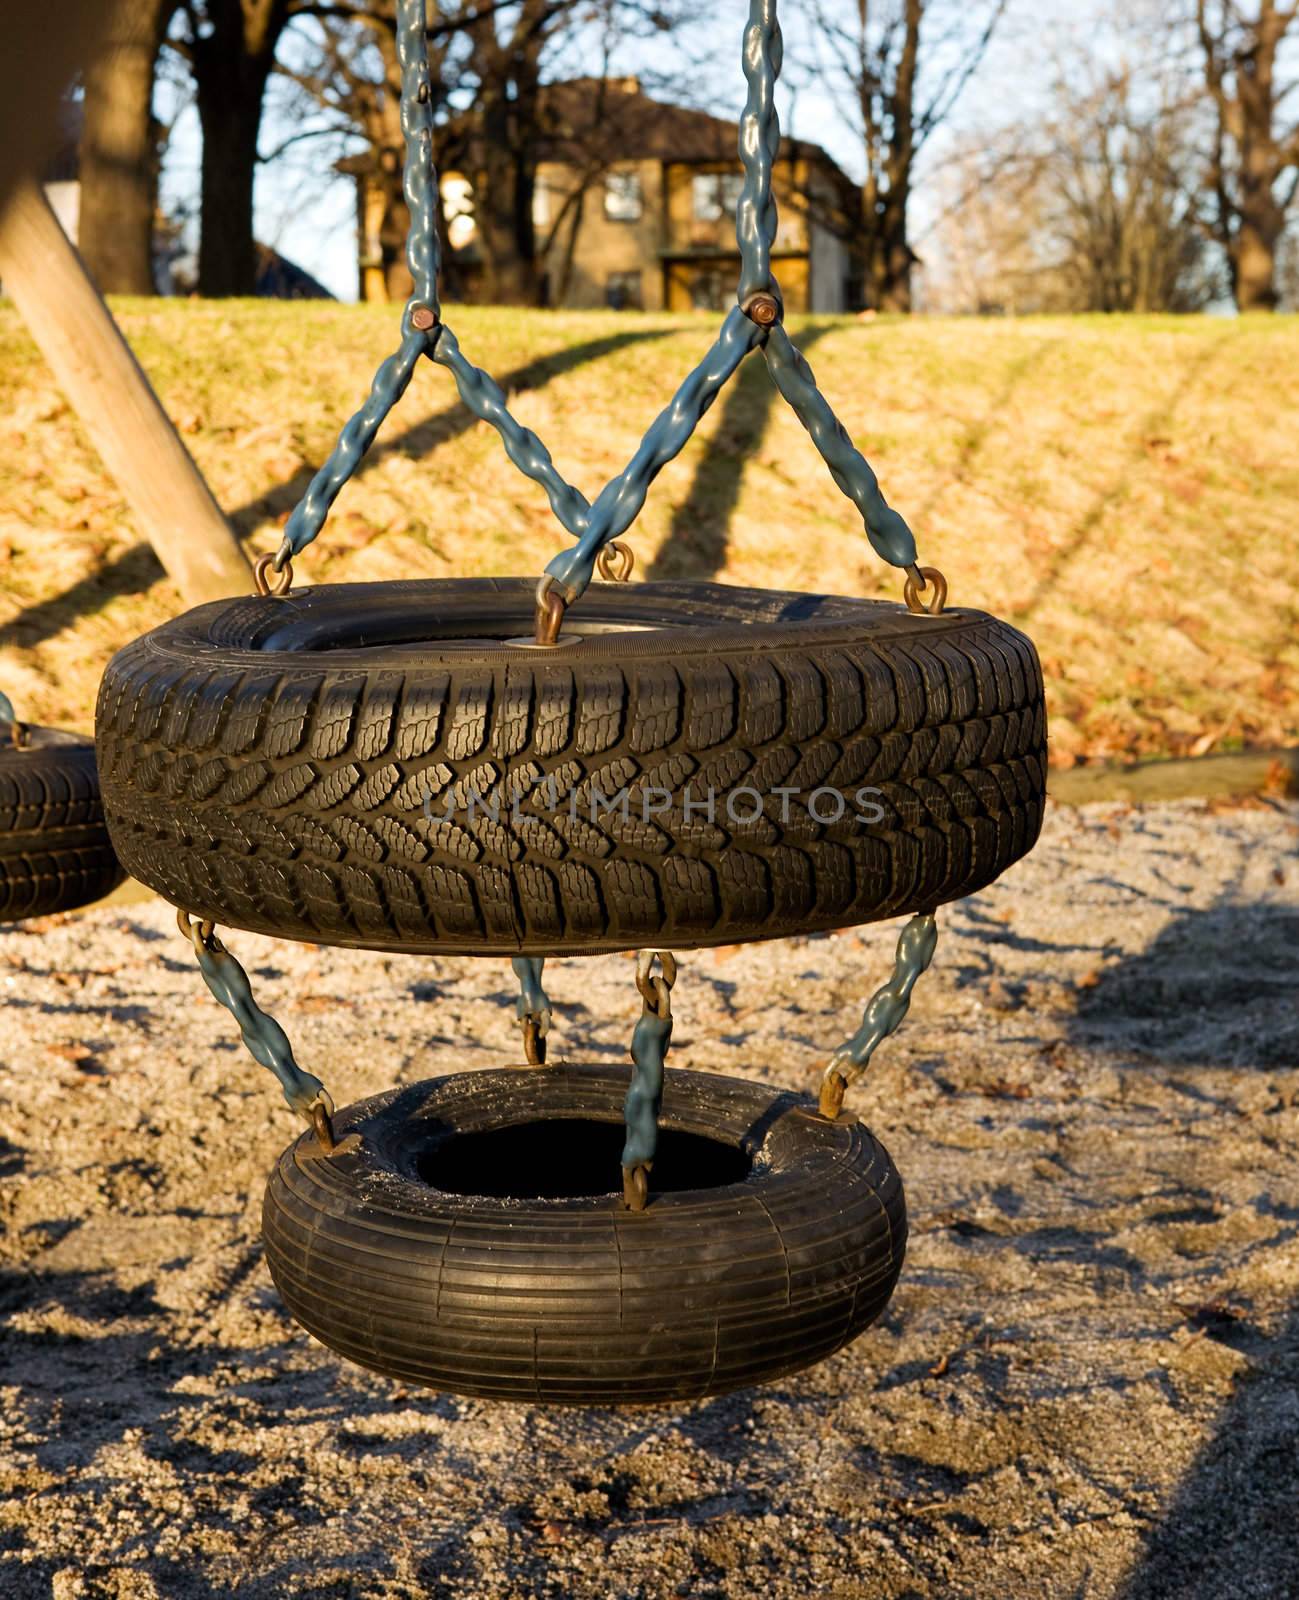 A childs swing on a playground